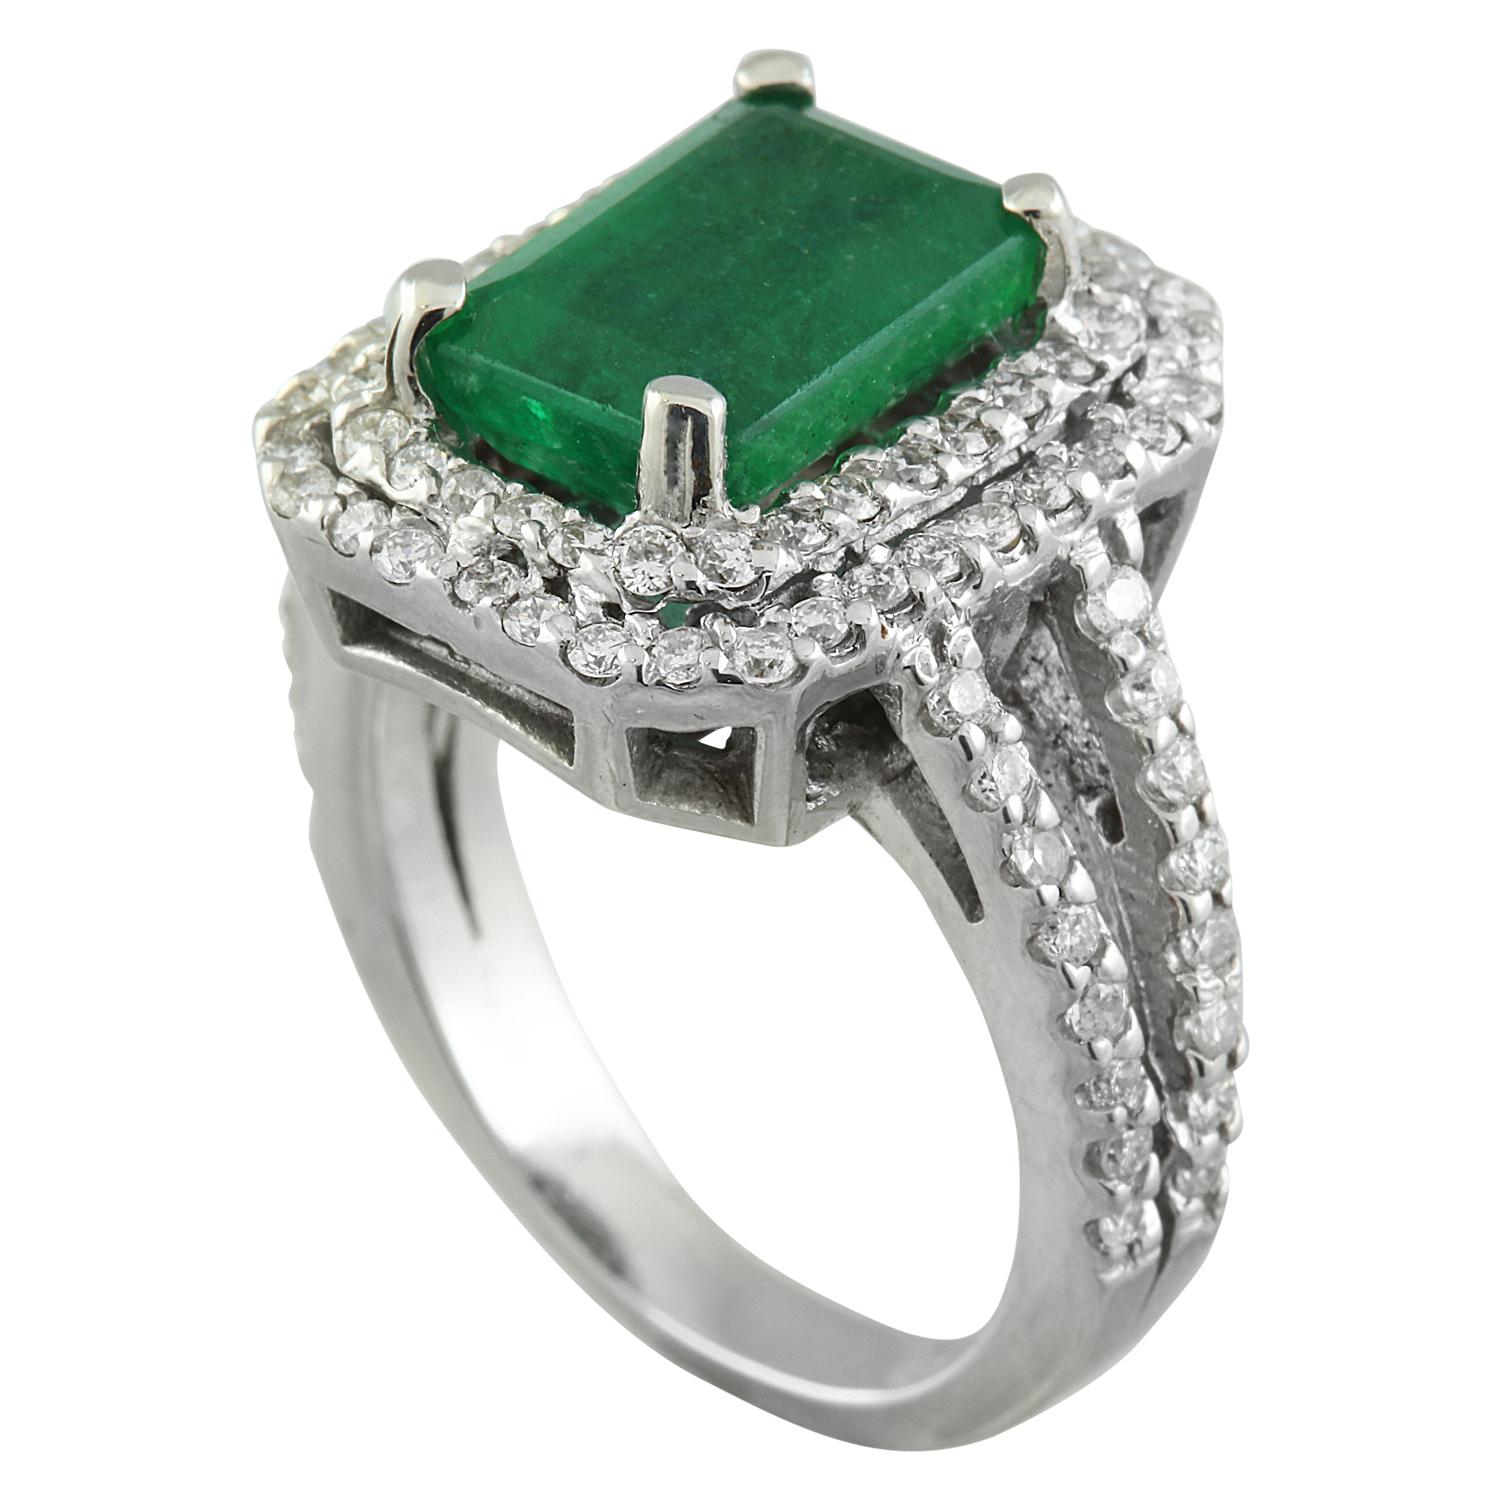 4.50 Carat Natural Emerald 14 Karat Solid White Gold Diamond Ring
Stamped: 14K 
Ring Size: 7 
Total Ring Weight: 7.7 Grams 
Emerald Weight: 3.35 Carat (9.00x7.00 Millimeters)  
Diamond Weight: 1.15 Carat (F-G Color, VS2-SI1 Clarity) 
Quantity: